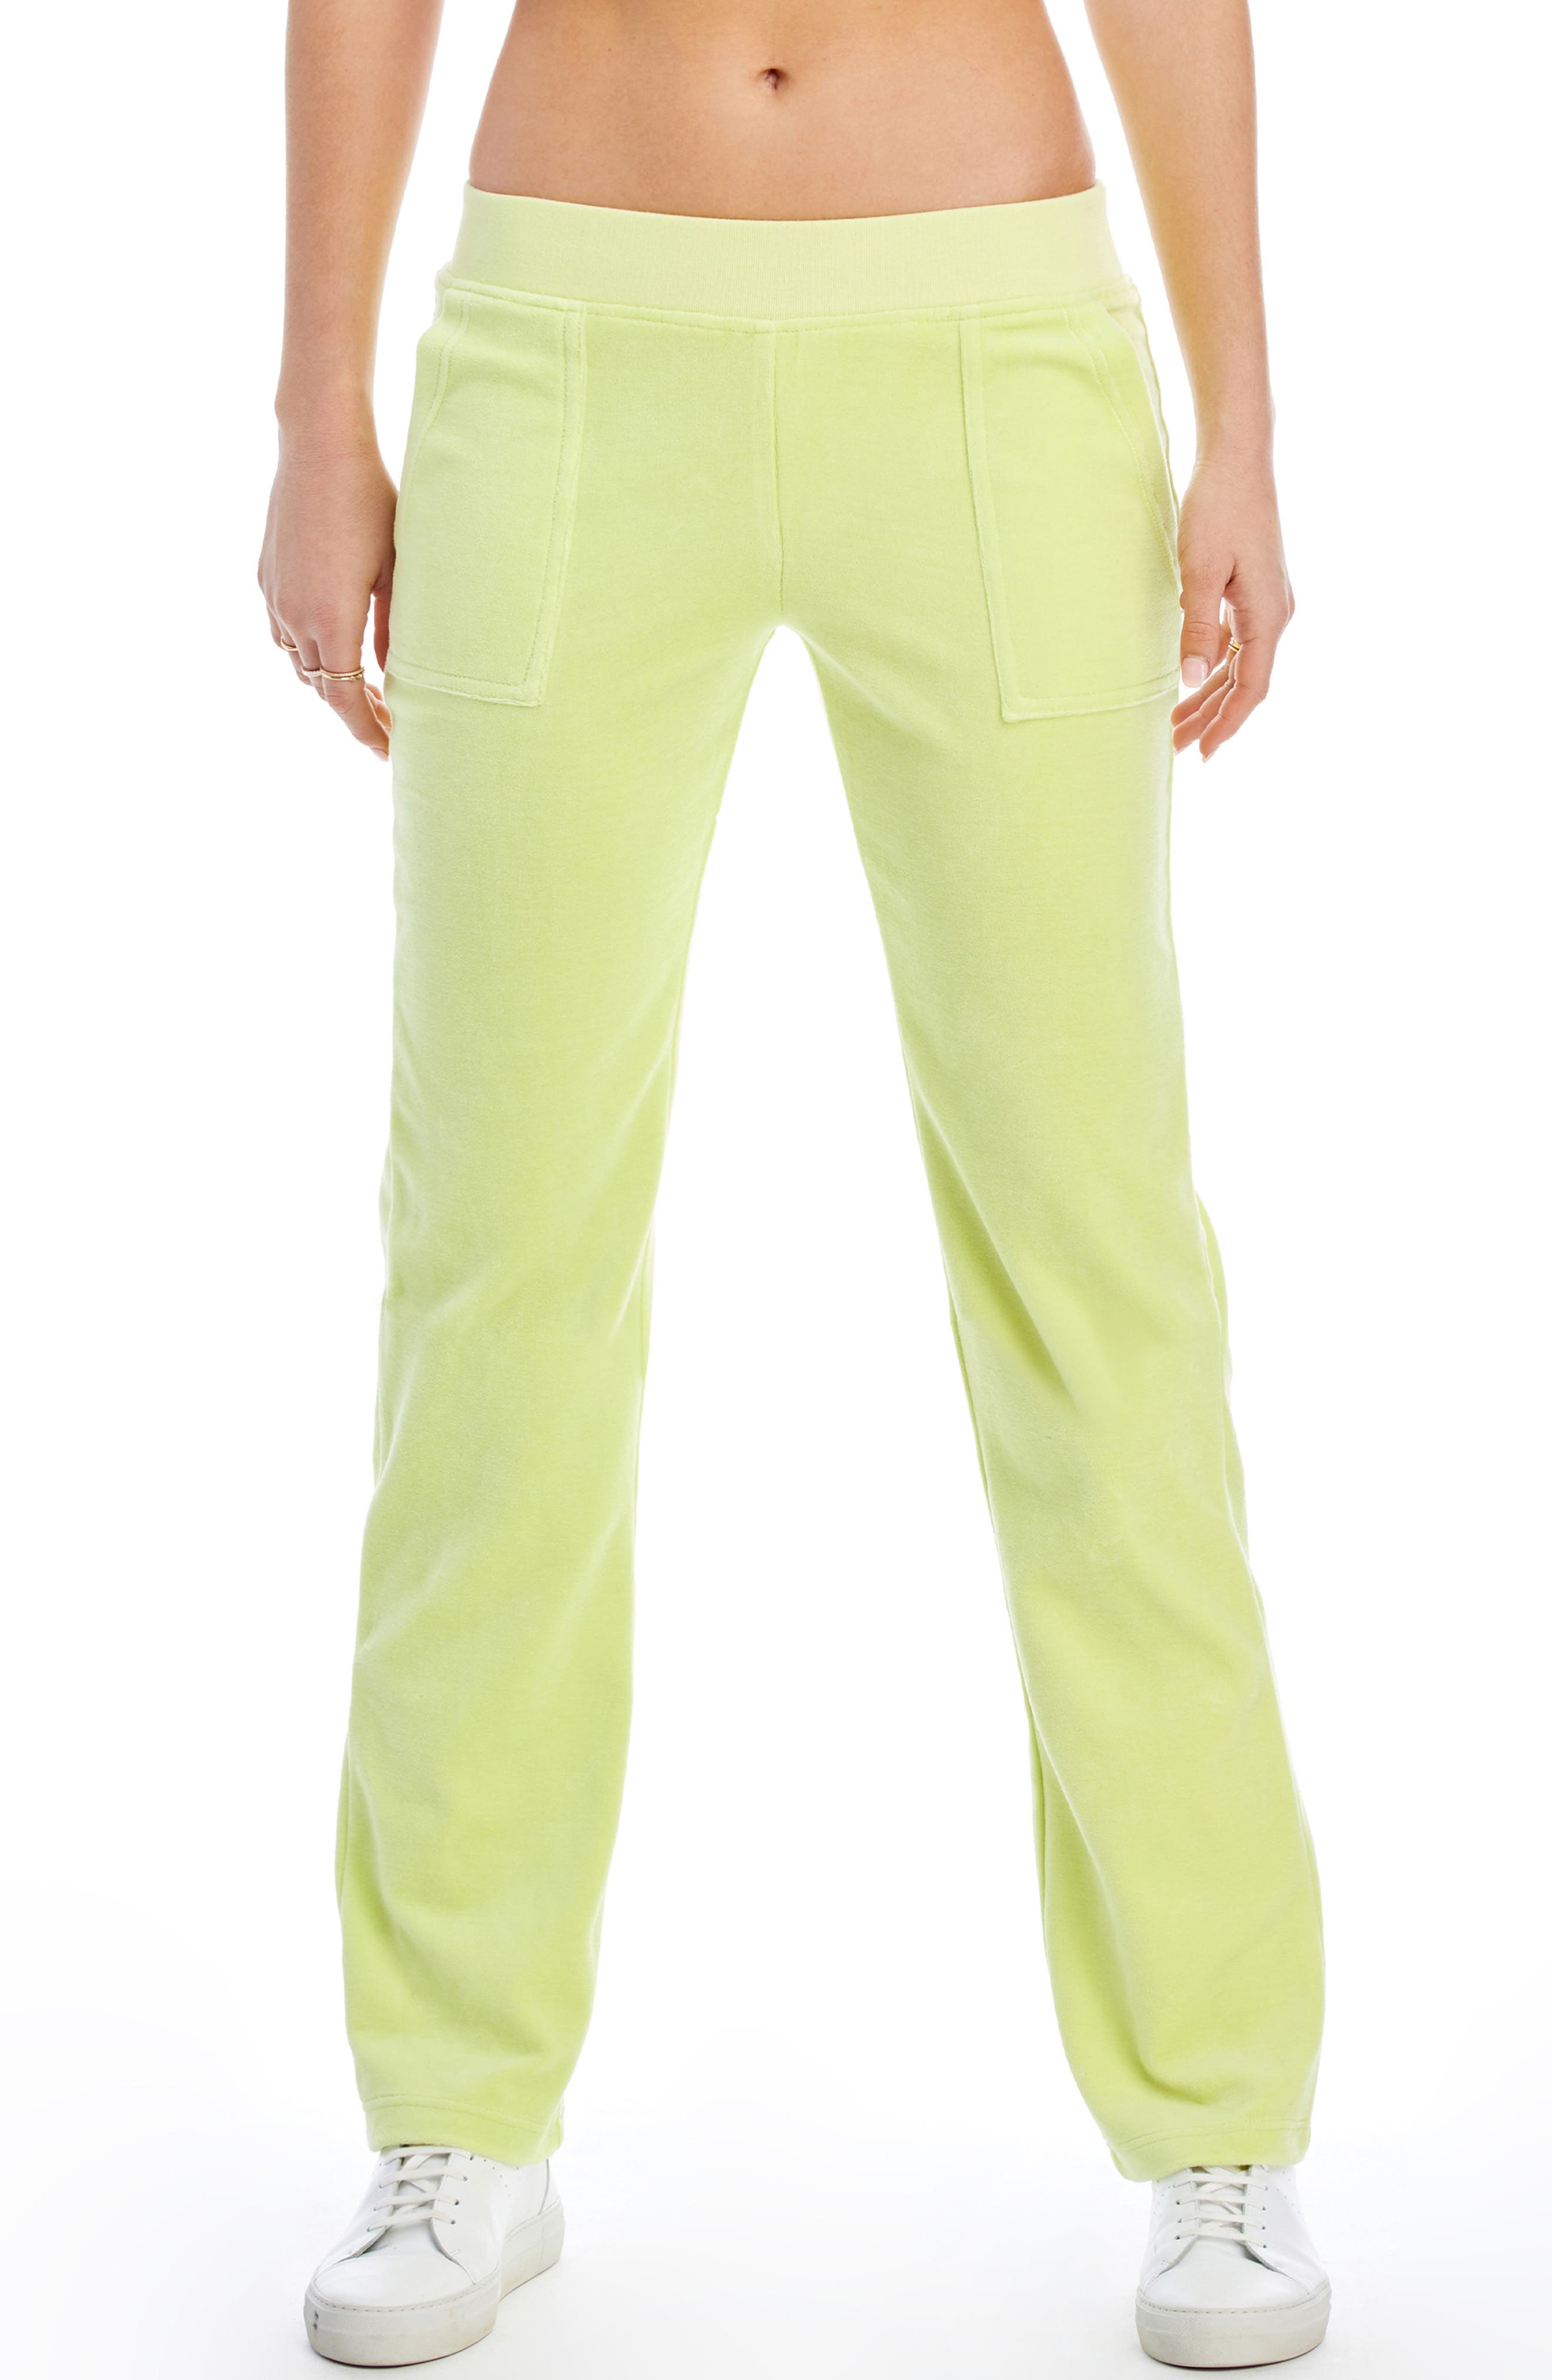 Juicy Couture Velour Track Pants in Pear